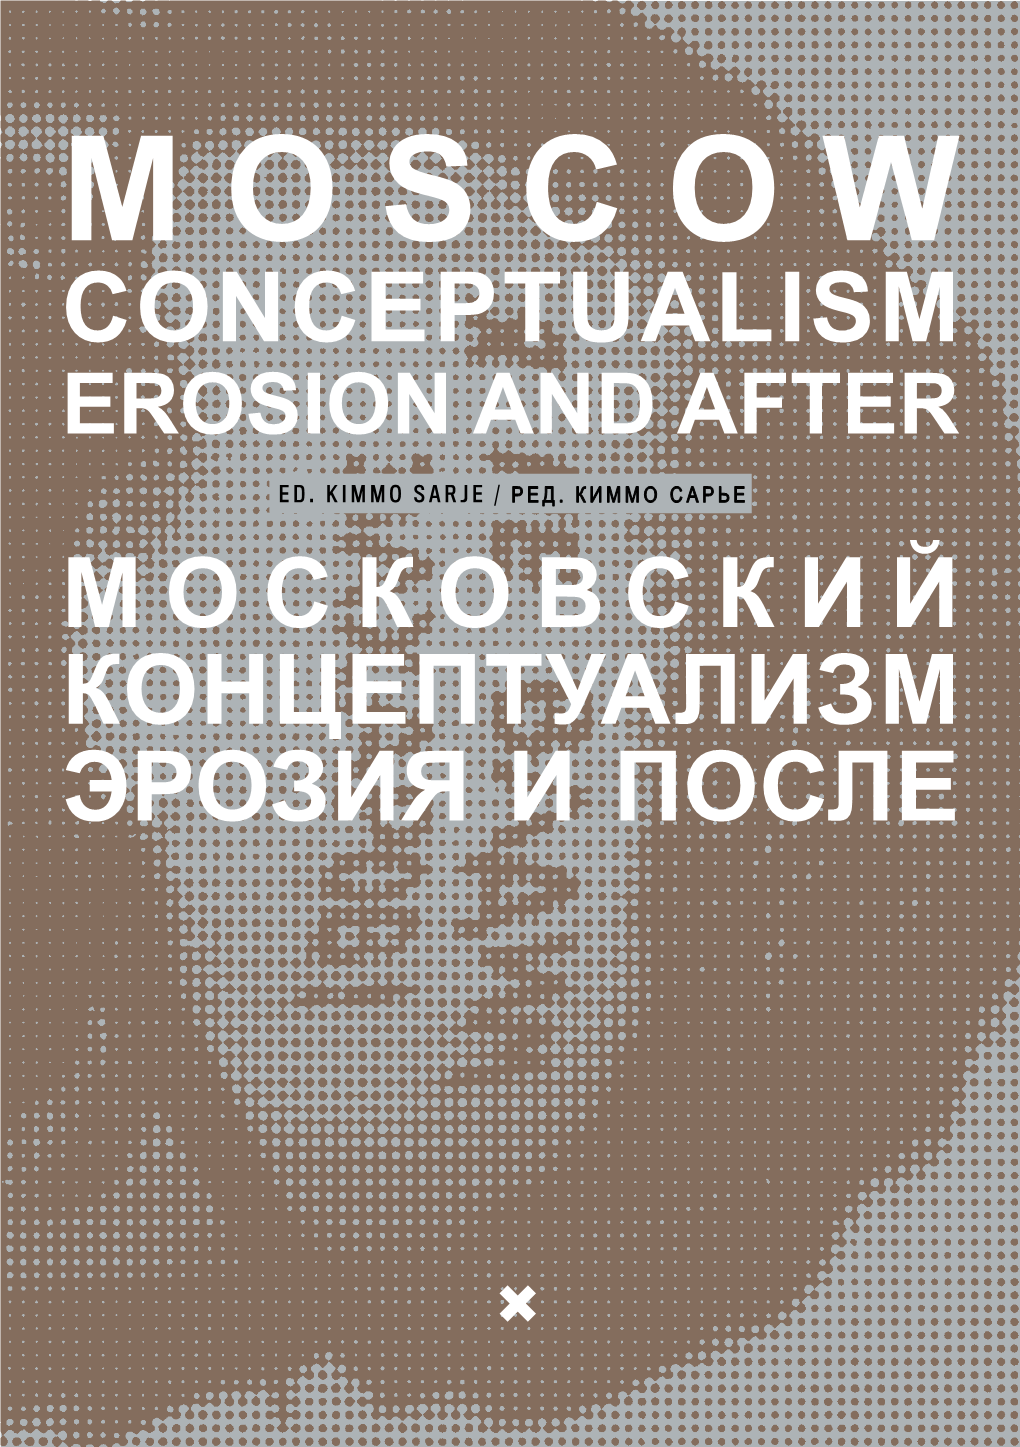 Moscow Conceptualism Erosion and After Ed